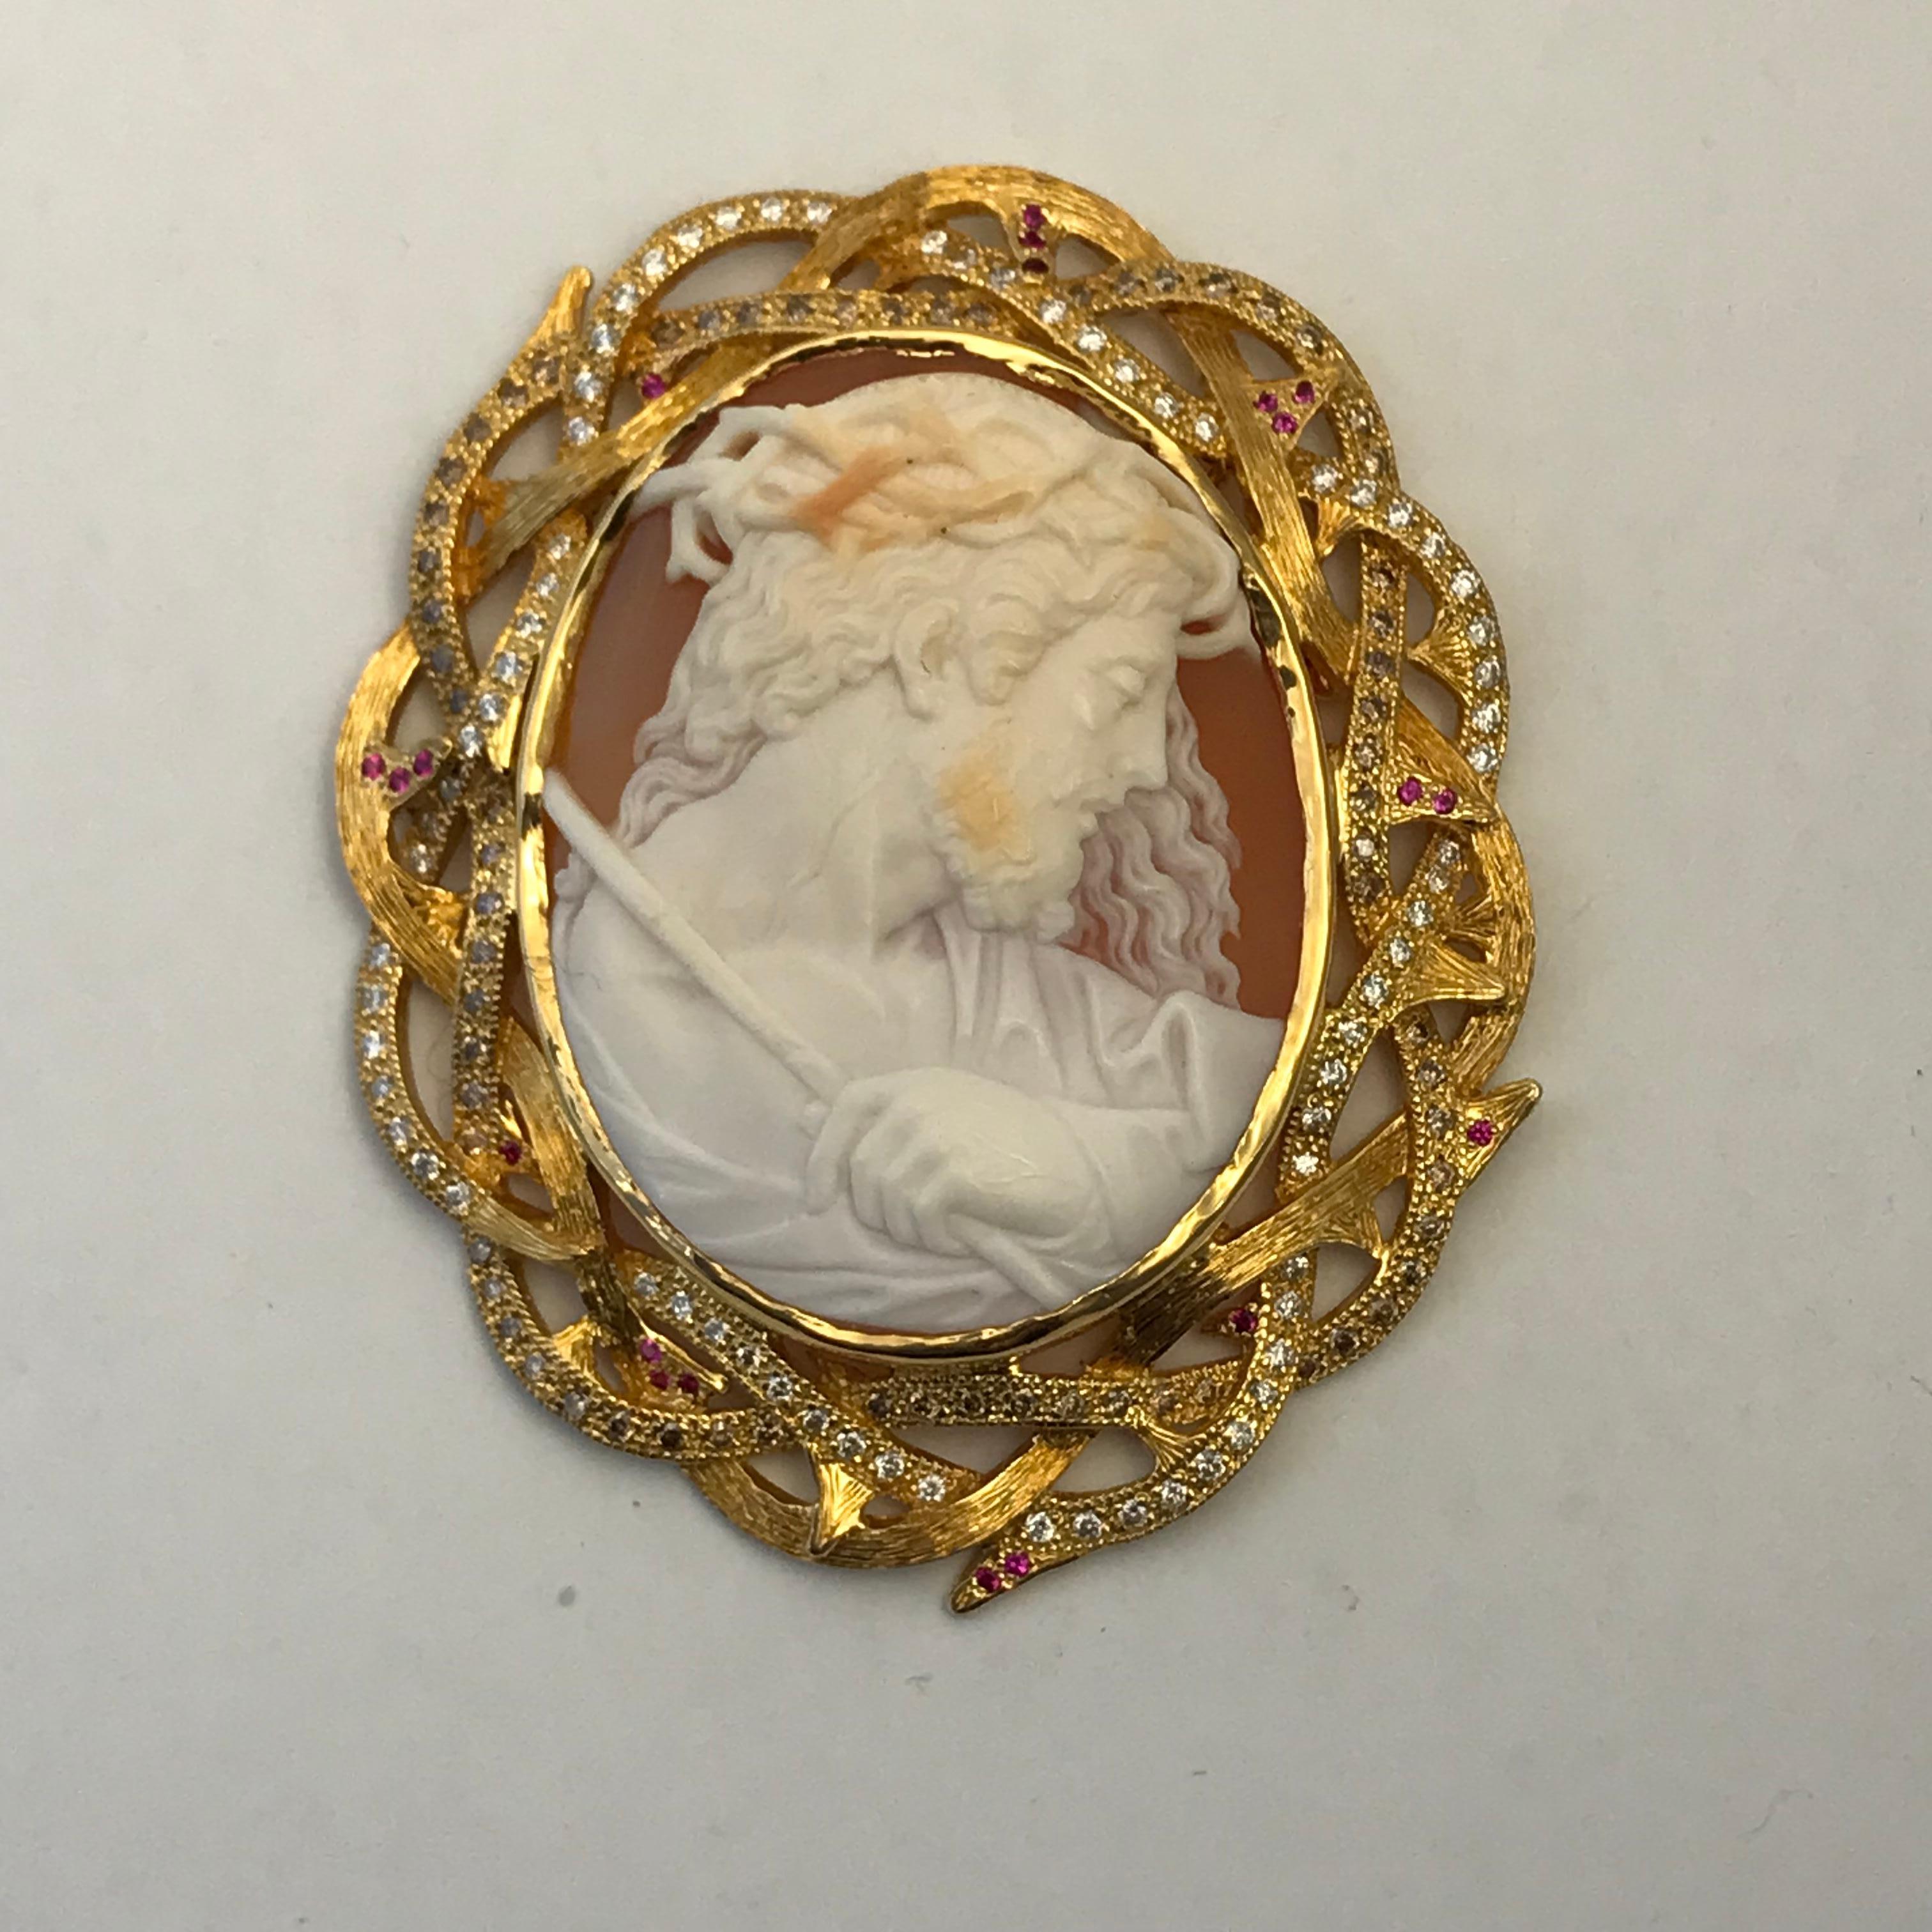 Cameo 1890s Jesus Set in 14K Yellow Gold With Diamonds, Rubies & Brown Diamonds
This is one of the finest carved cameos I have ever seen.
Antique Cameo/pendant-Jesus-1890's. Set in 14k yellow gold, with  1.15 cts Diamonds, .24 cts rubies and .79